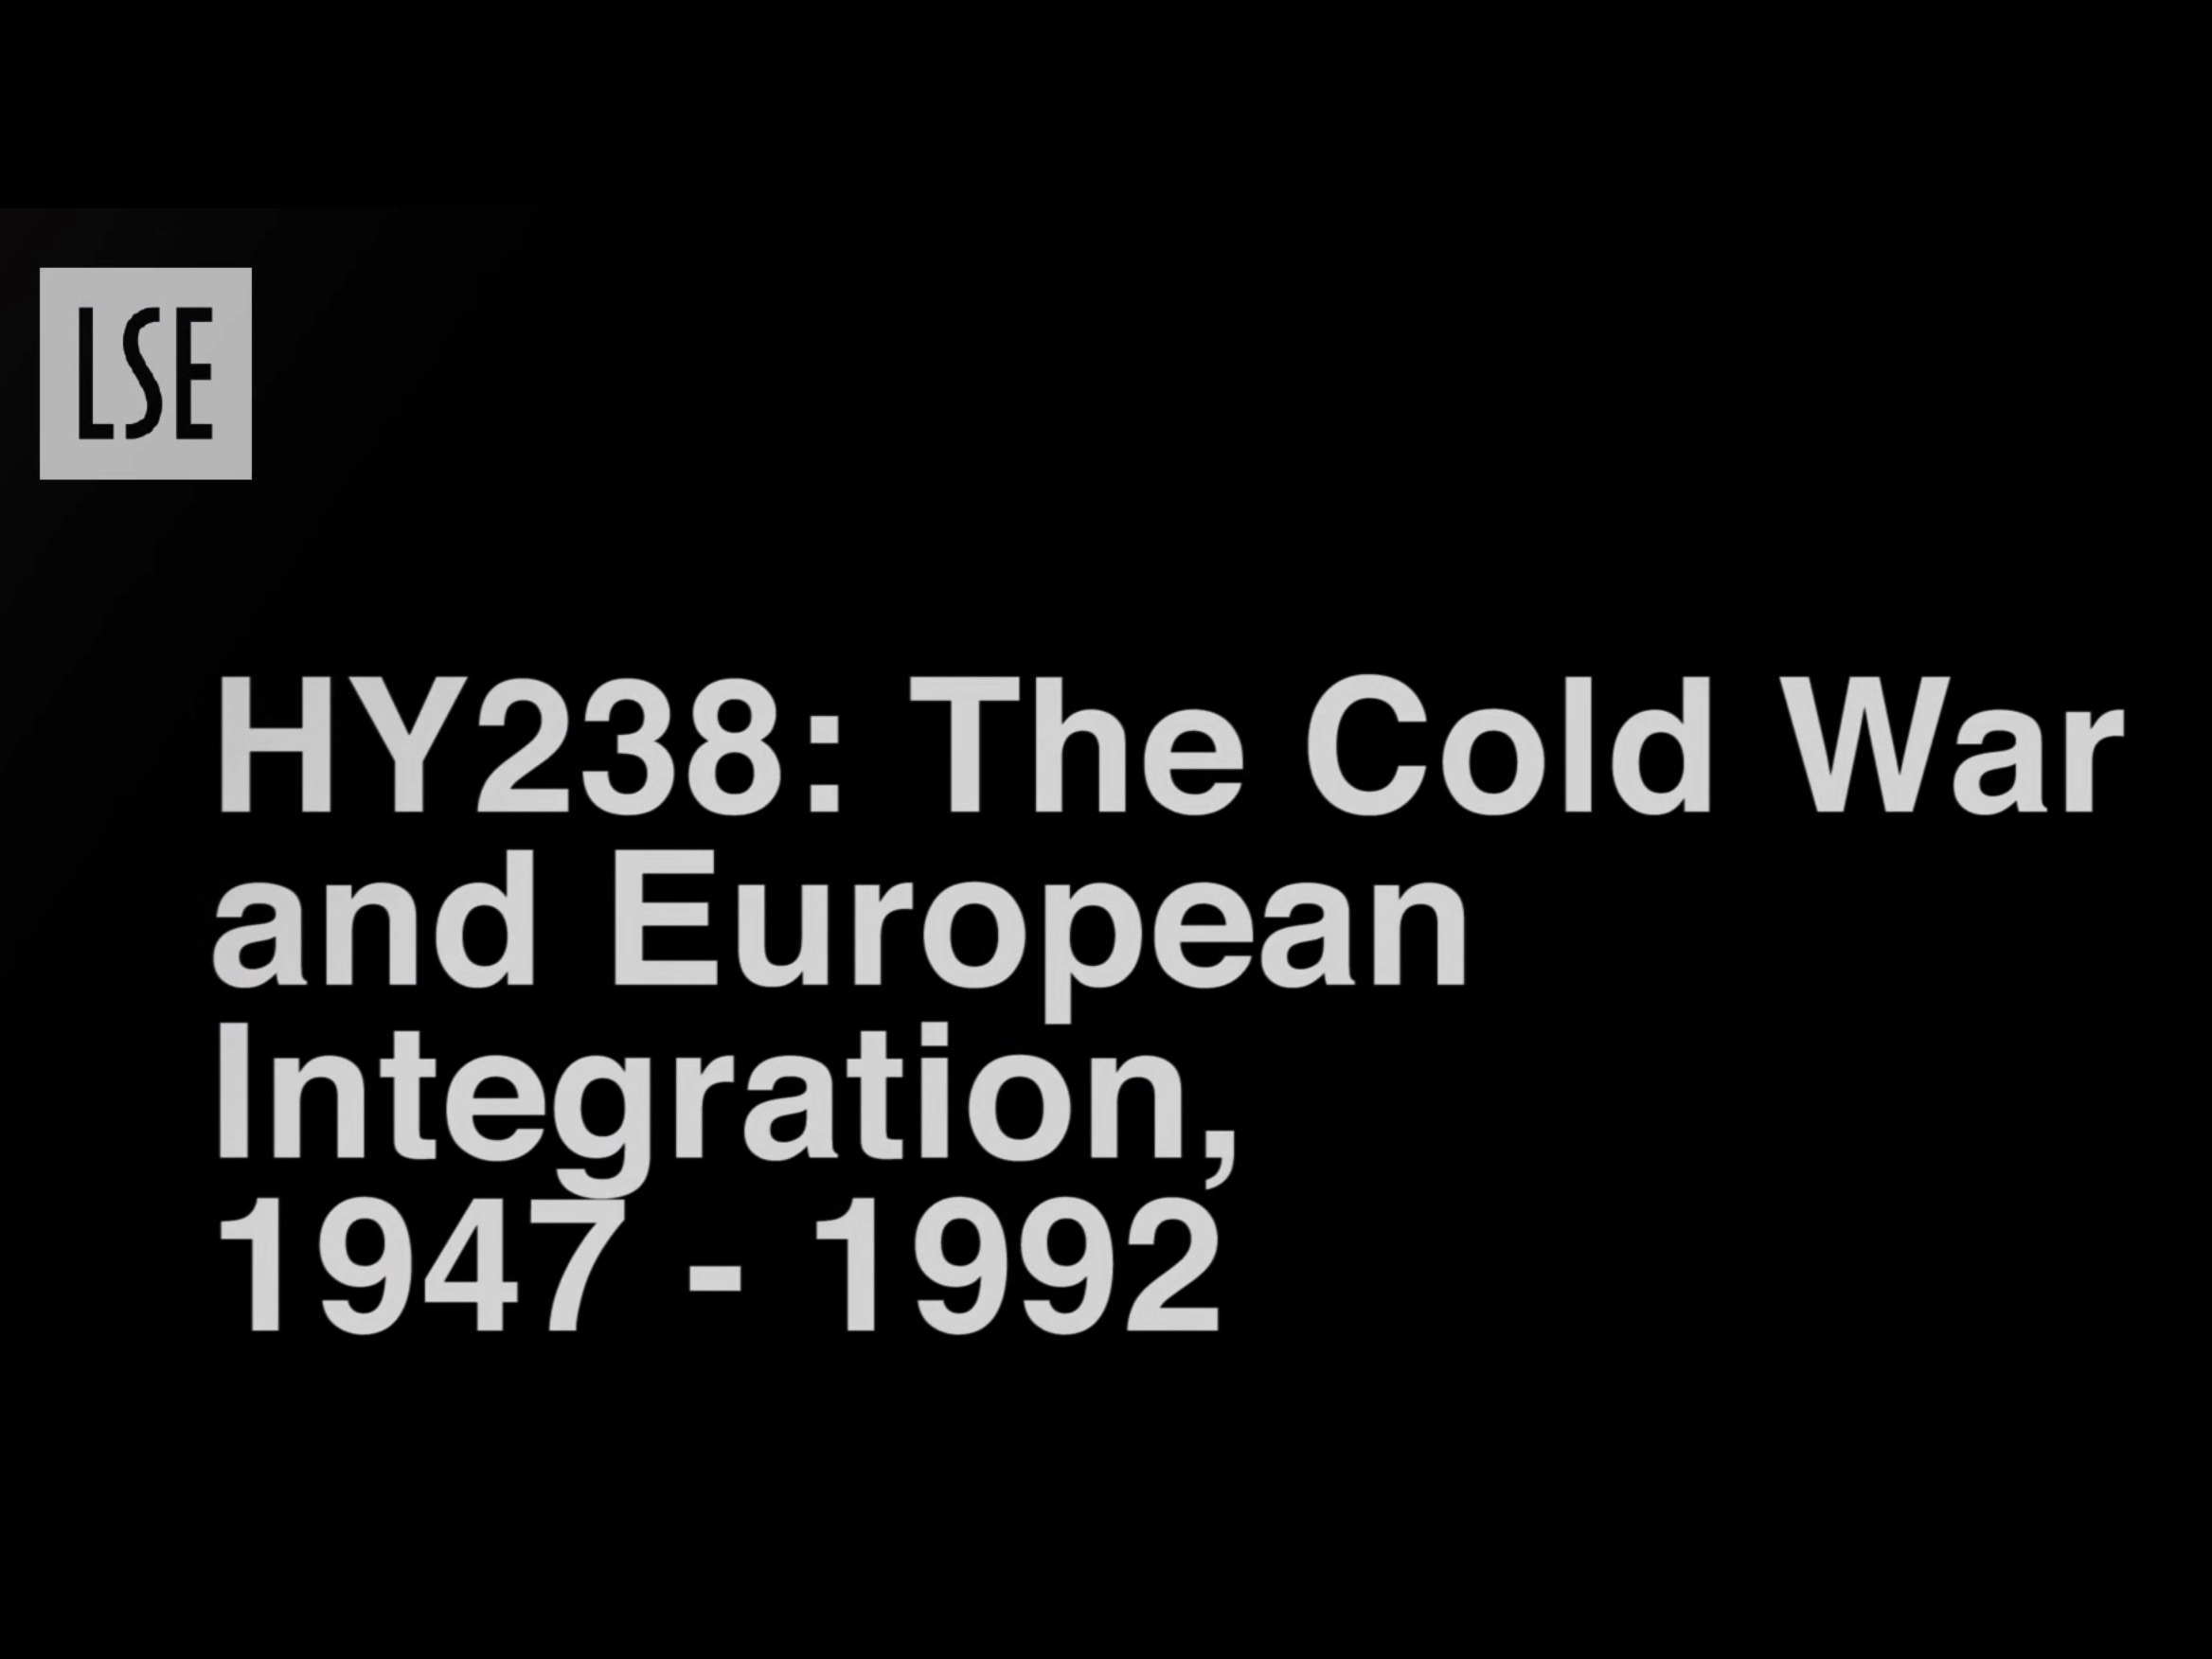 HY238: The Cold War and European Integration, 1947-1992